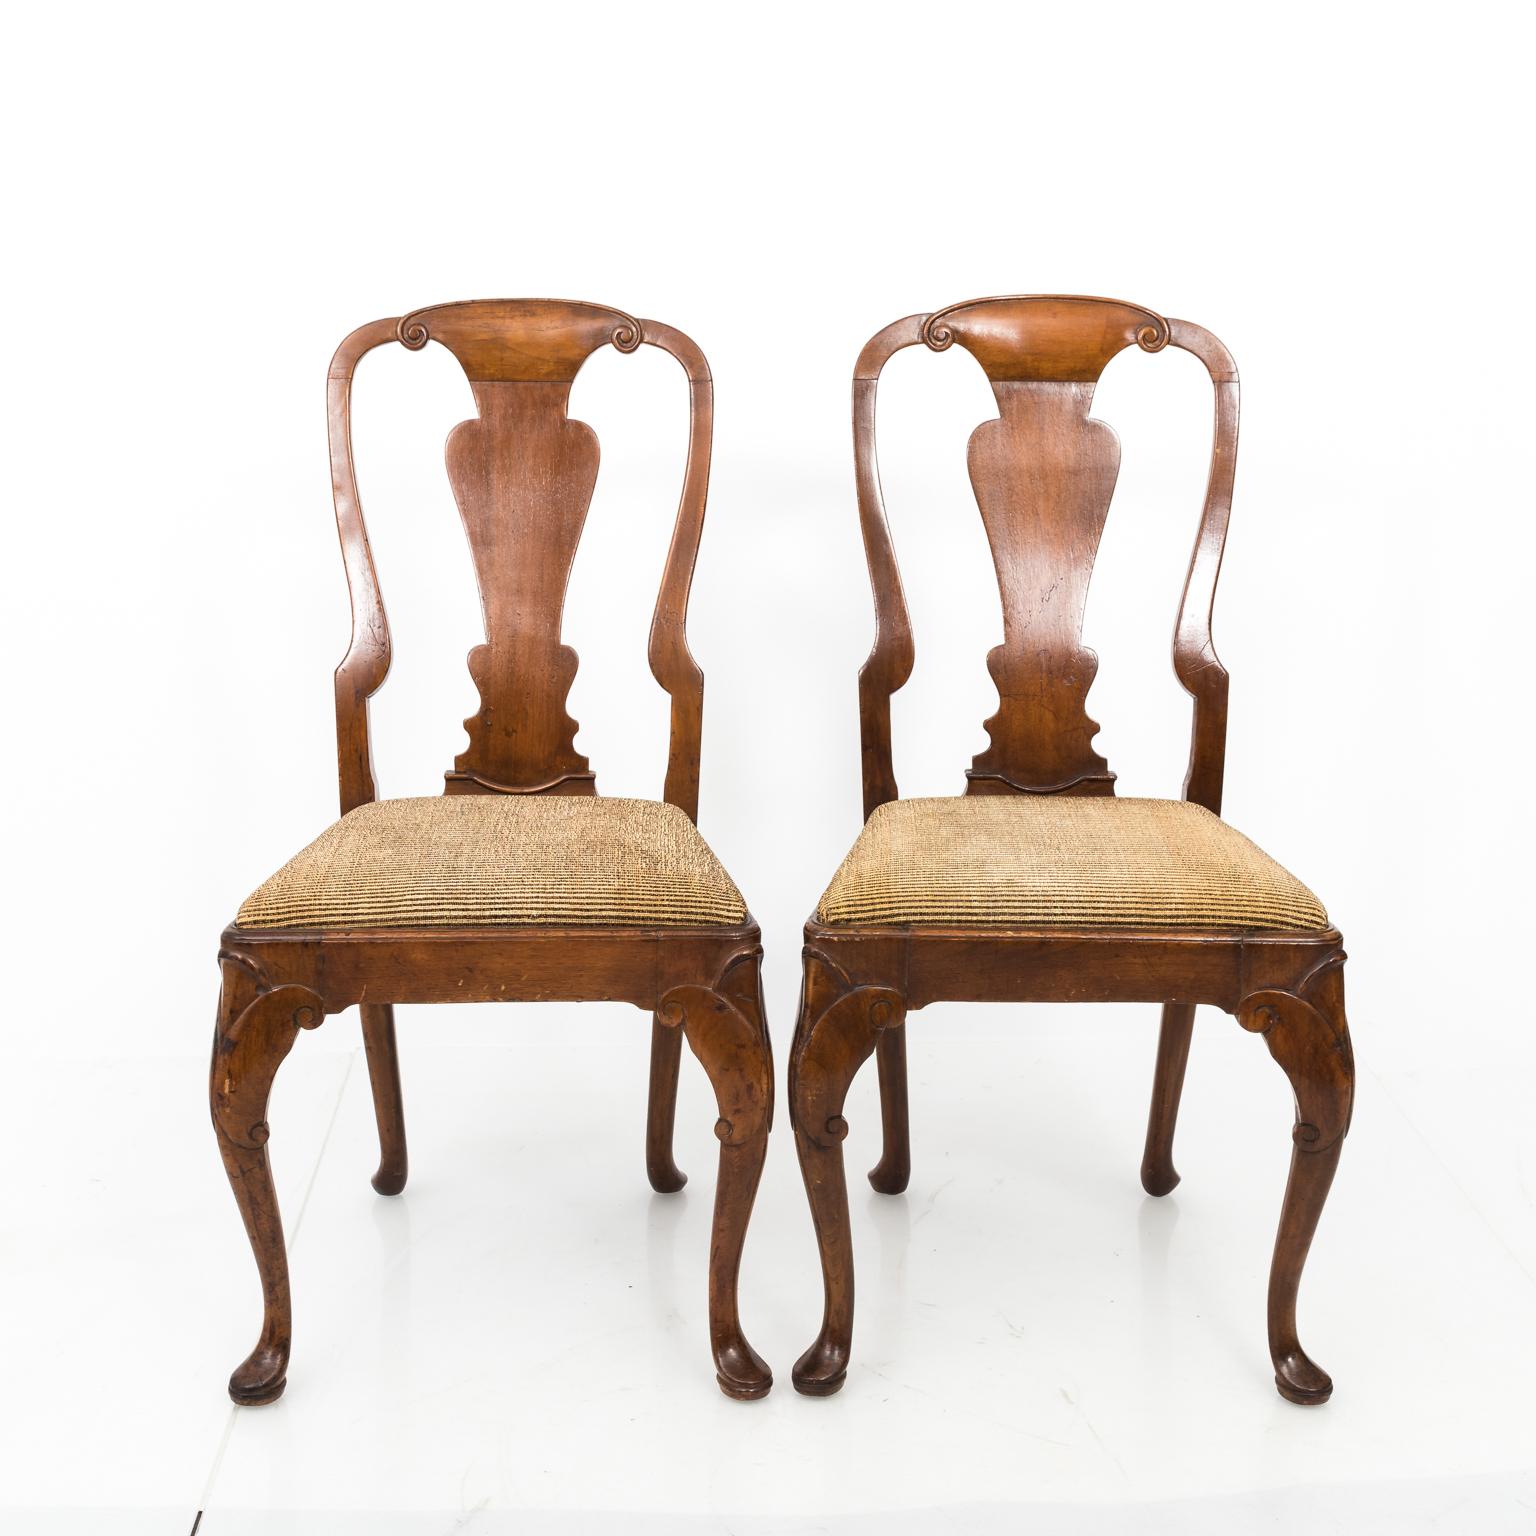 Upholstery Pair of Early 19th Century Queen Anne Side Chairs